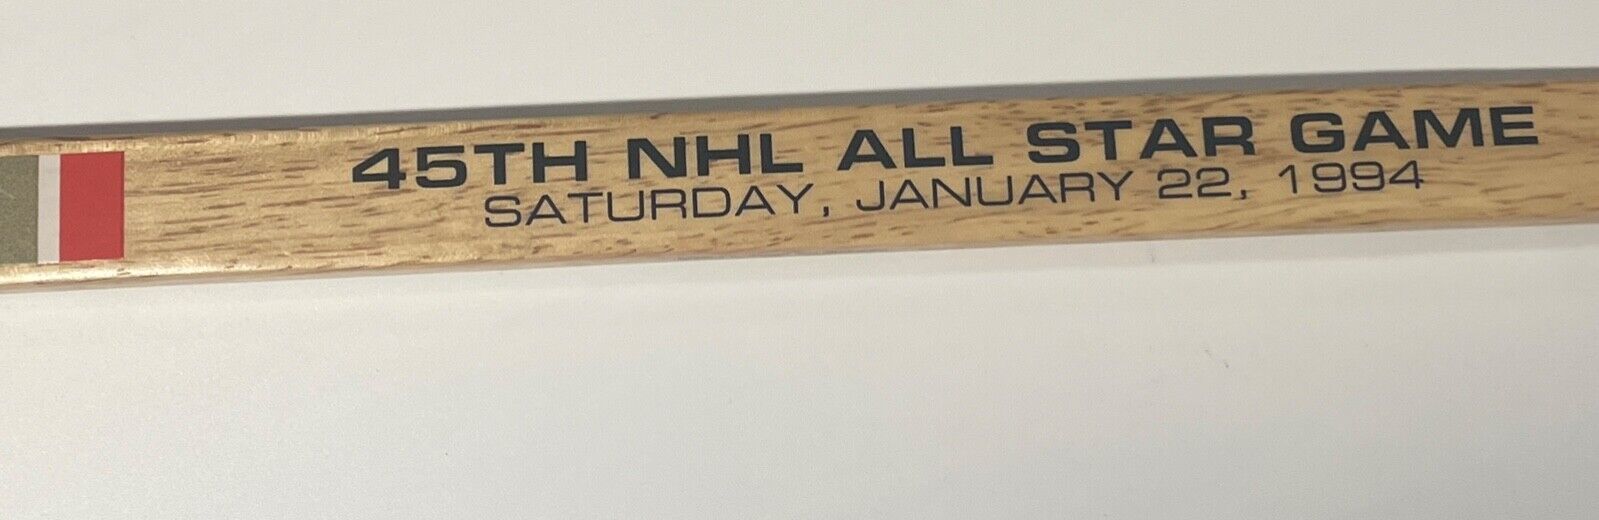 Mark Messier + Brian Leetch Signed Mini Hockey Stick, 1994 Stanley Cup MSG. JSA